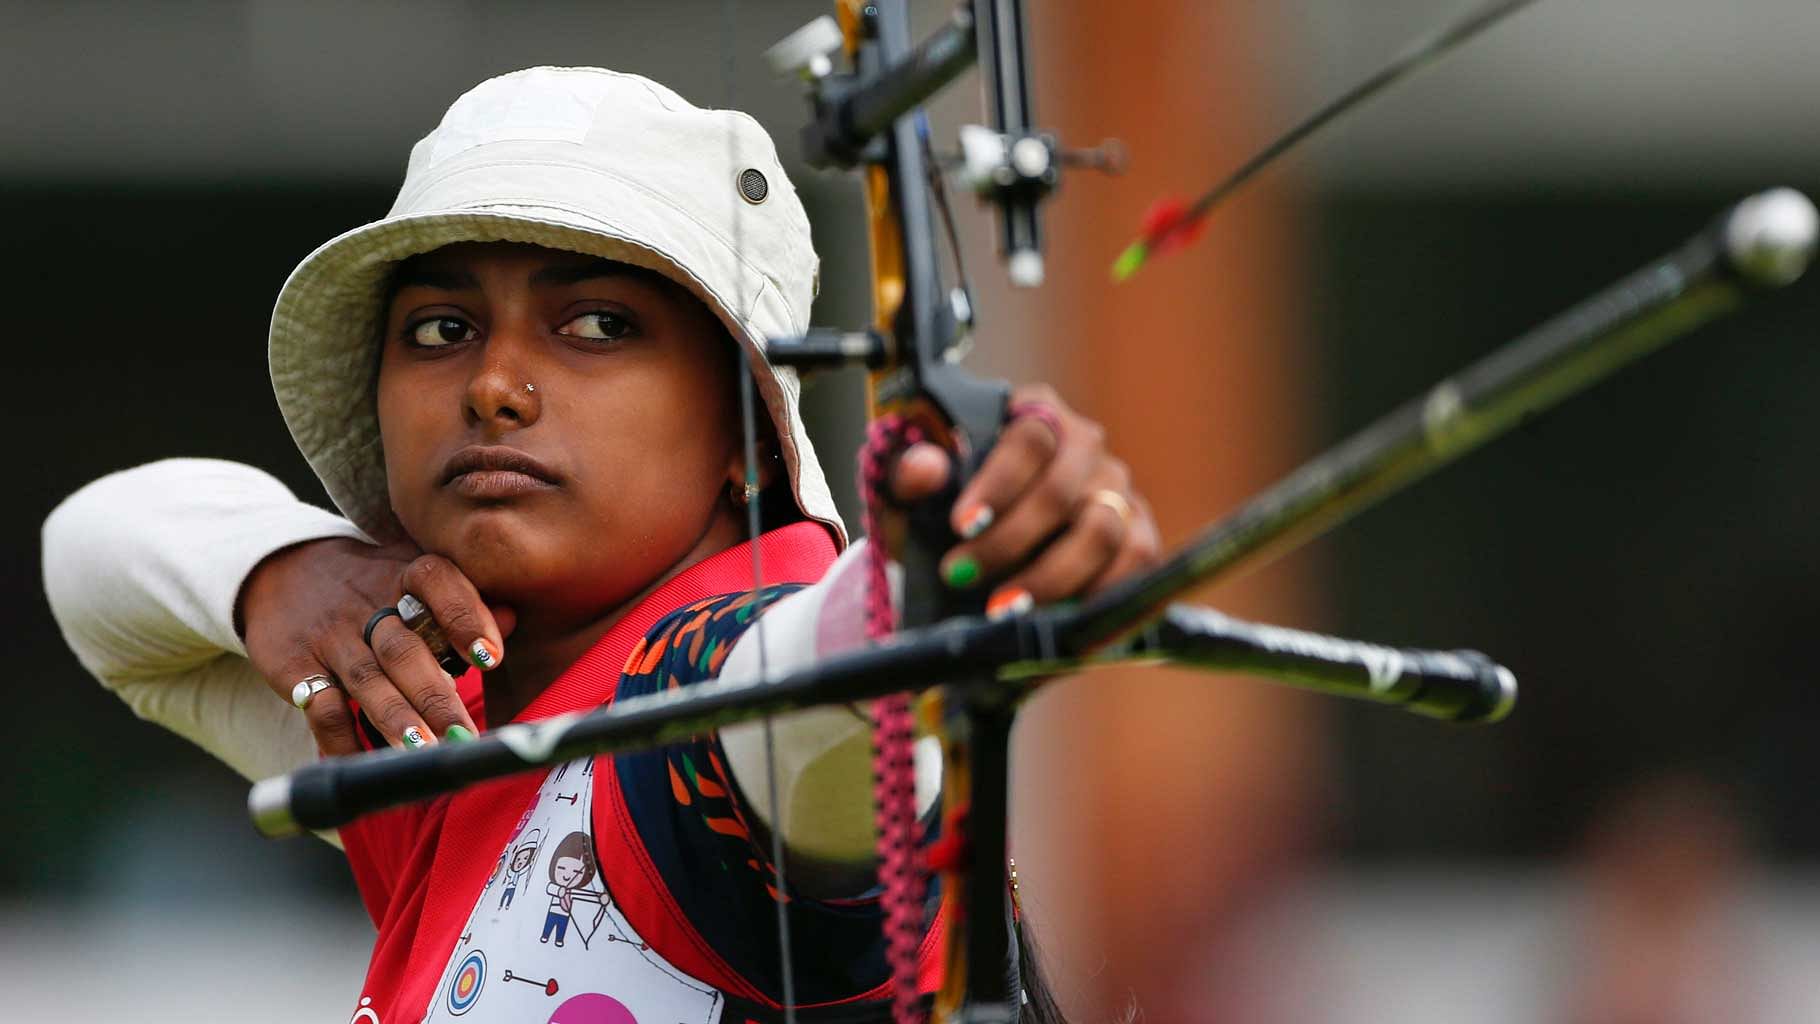 Deepika Kumari will not be able to defend her individual title that she had won at the stage one of the World Cup in 2018.